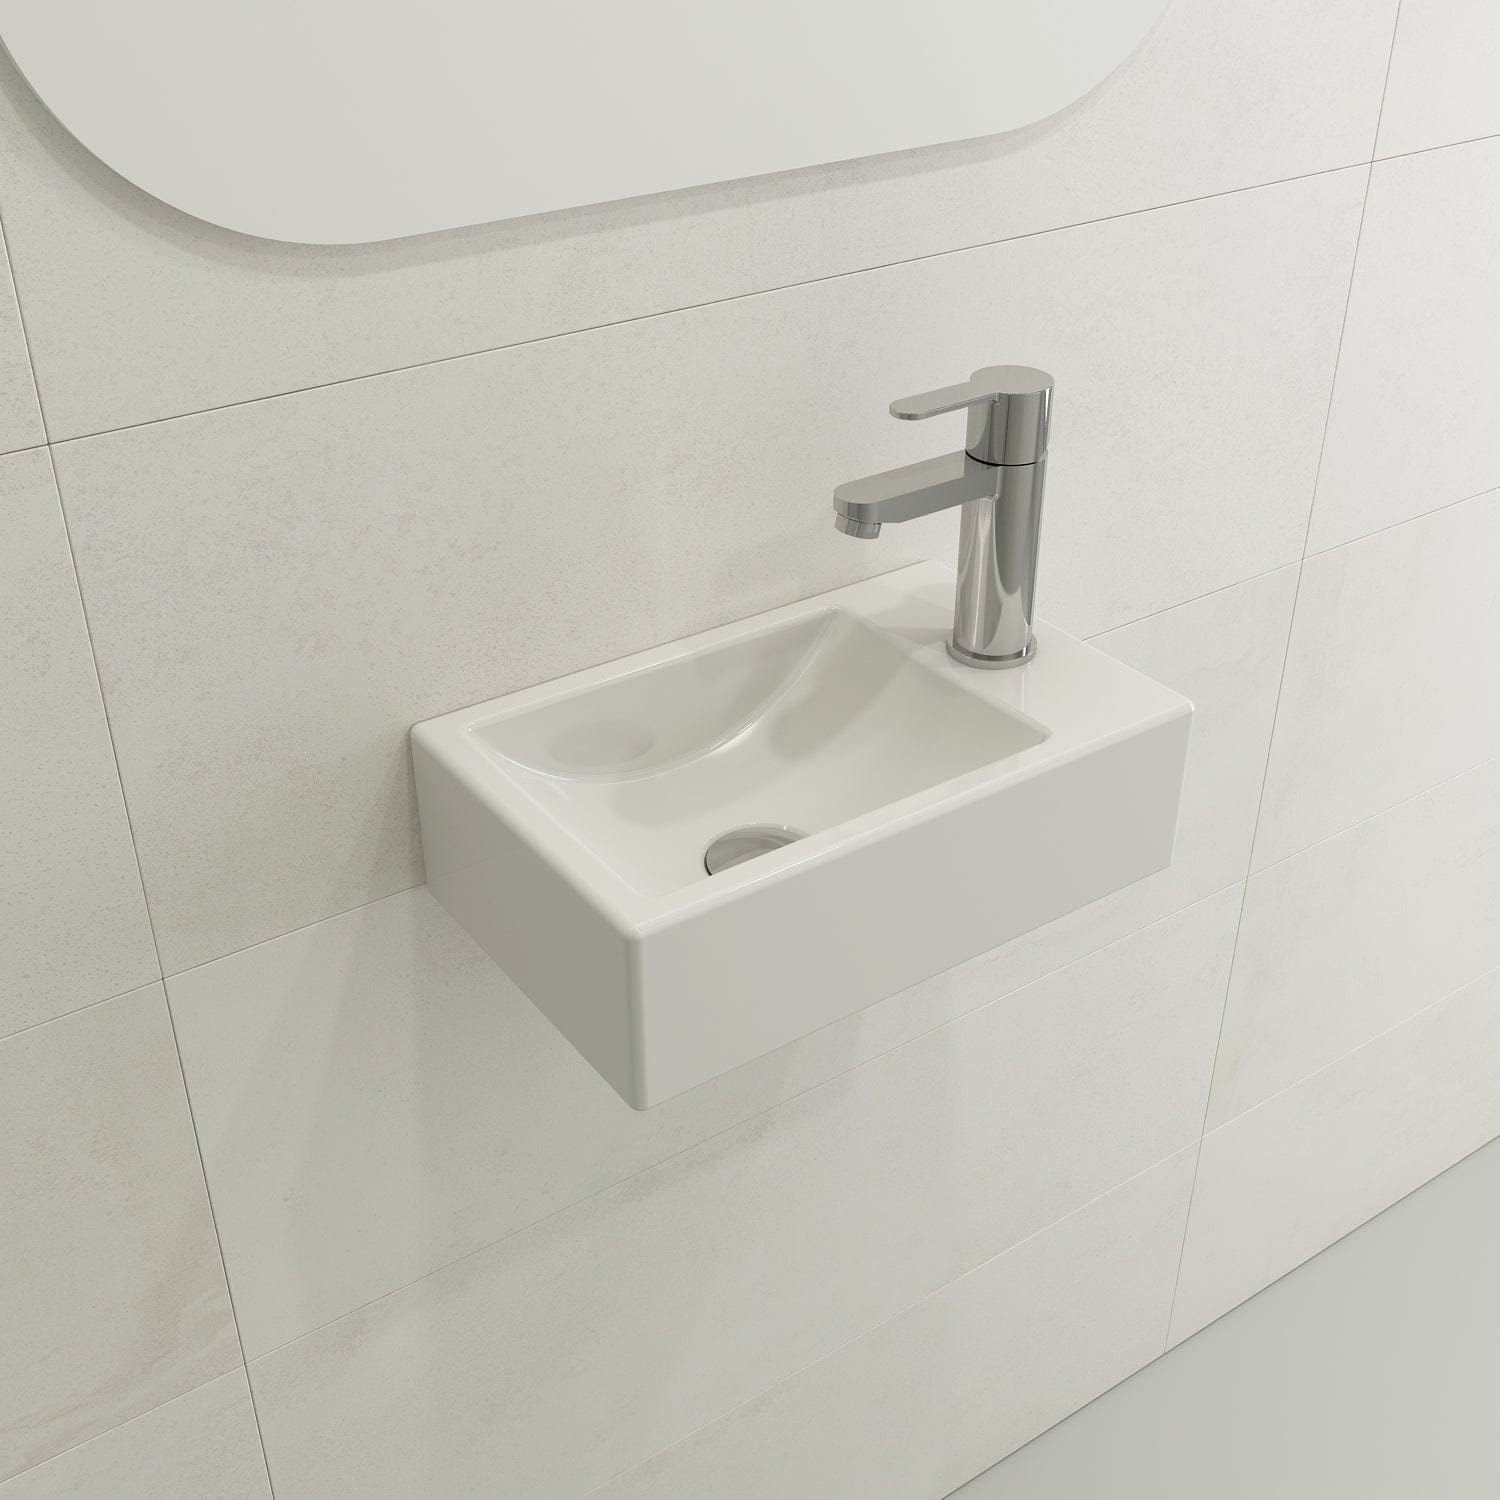 BOCCHI MILANO 14.5" Wall-Mounted Sink Fireclay 1-hole Left Side Faucet Deck With Overflow